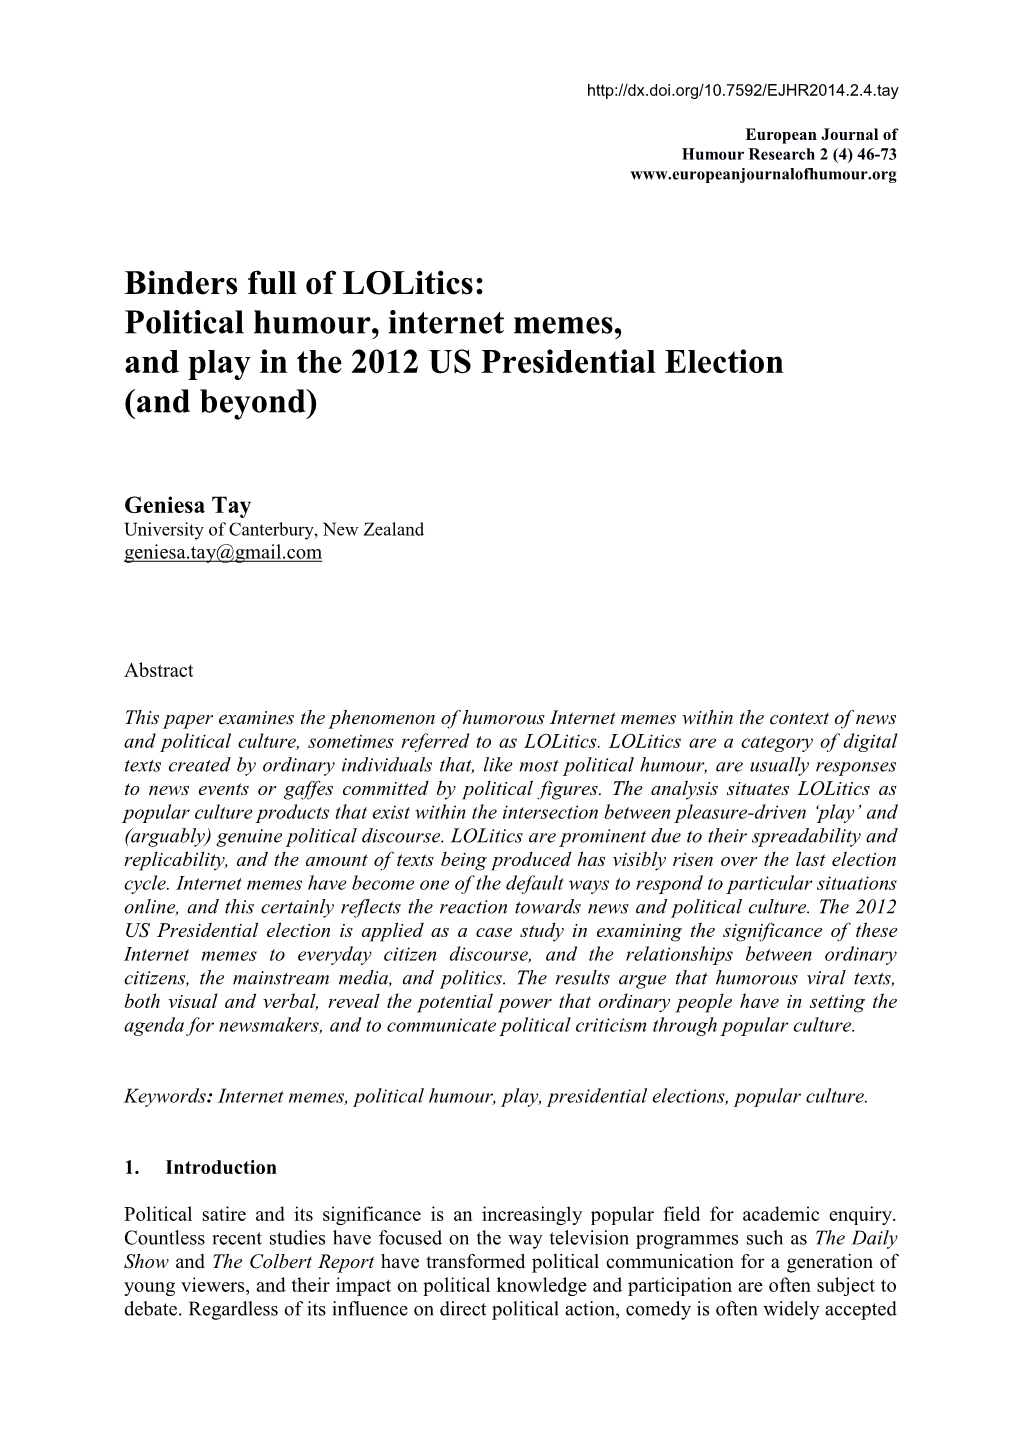 Binders Full of Lolitics: Political Humour, Internet Memes, and Play in the 2012 US Presidential Election (And Beyond)